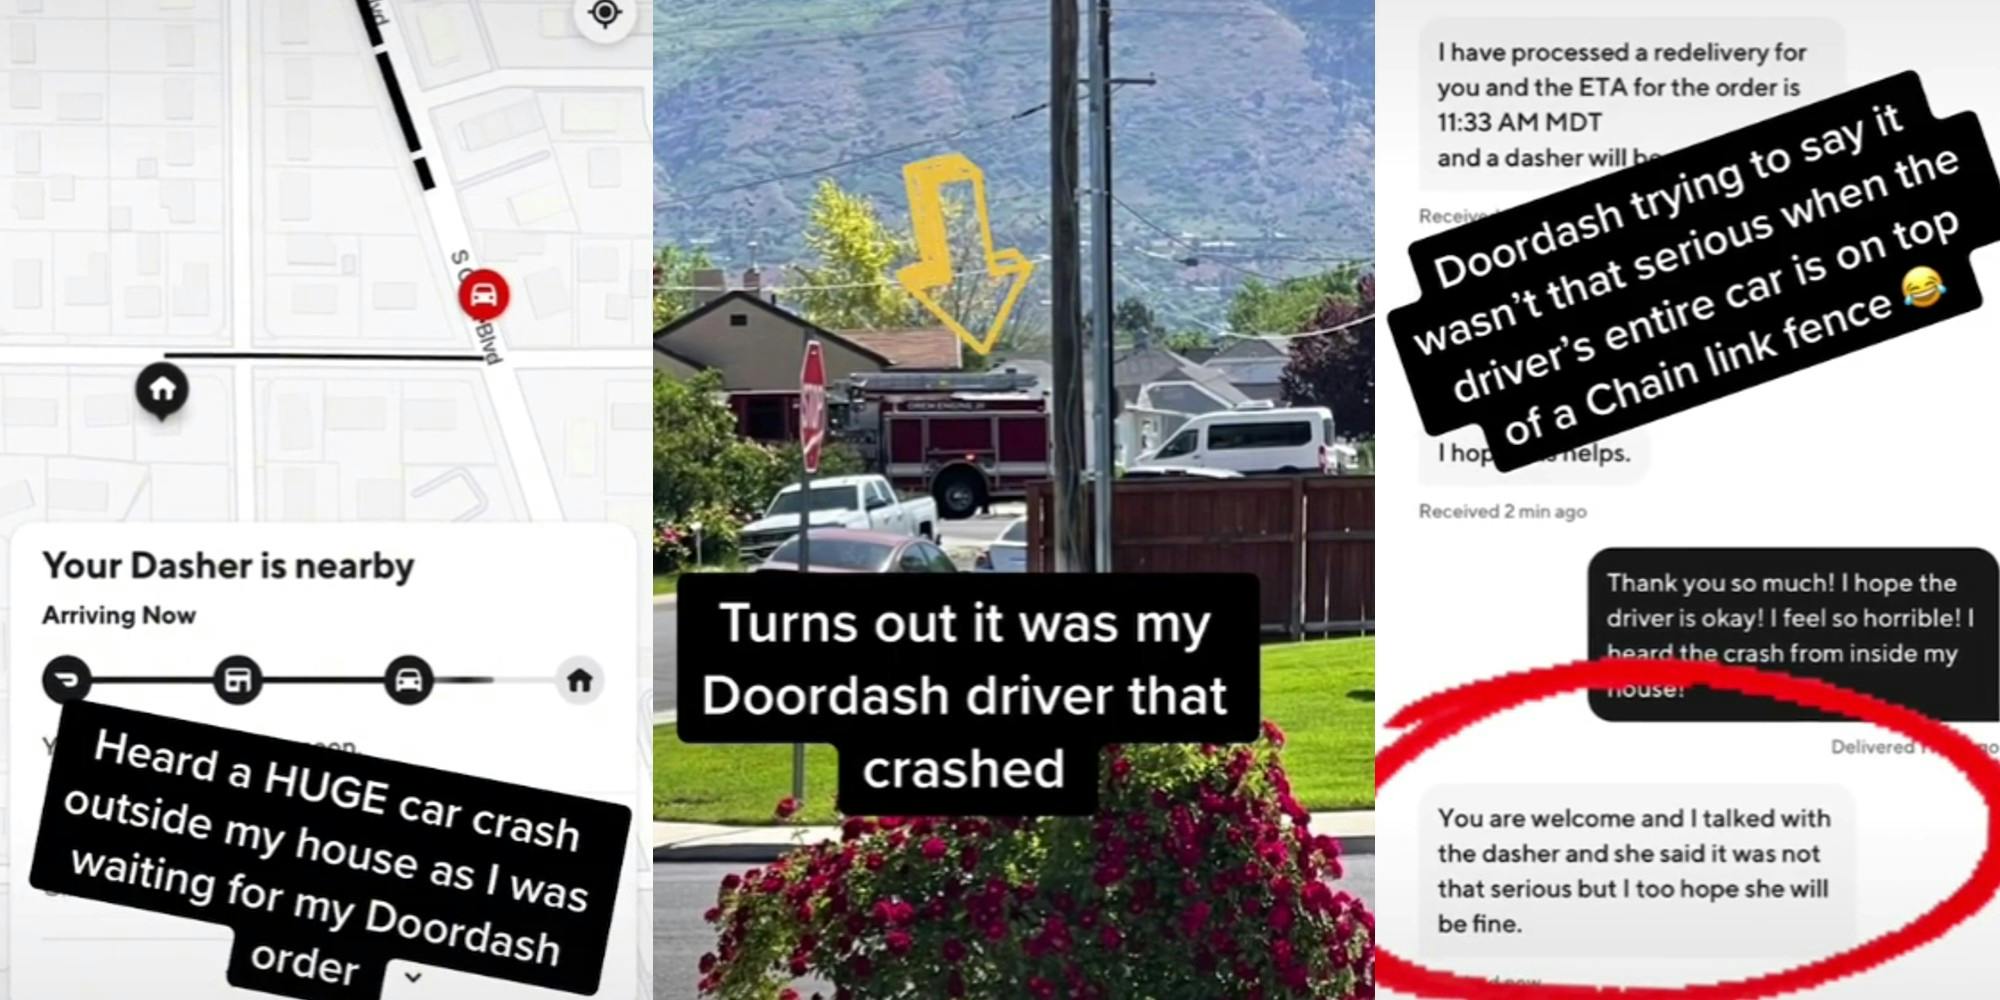 Woman says her DoorDash driver crashed on the way to deliver her food